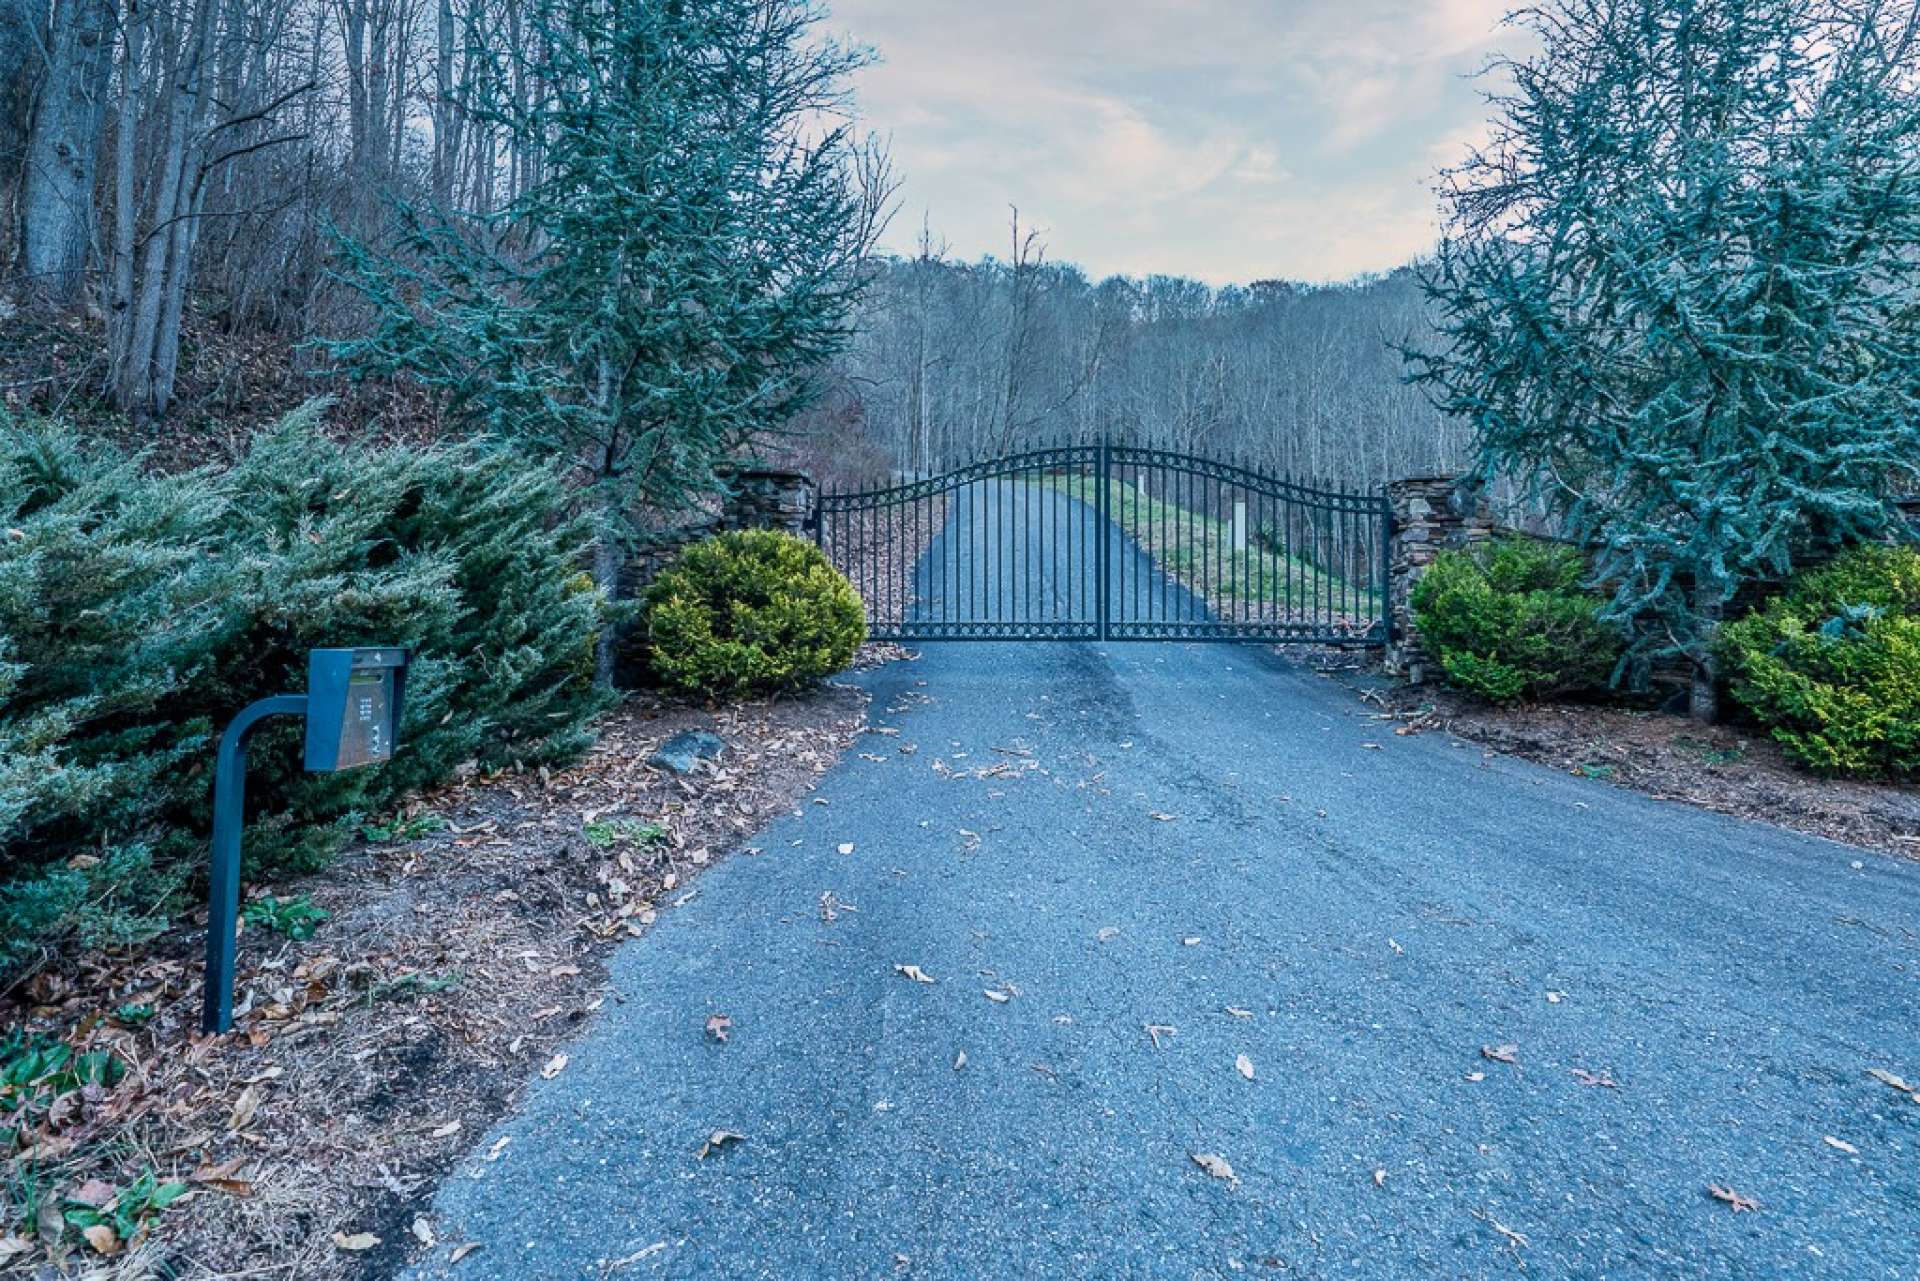 Ideally located in the Todd area of Southern Ashe County, Riverwalk at Todd offers privacy and security with a gated entrance.